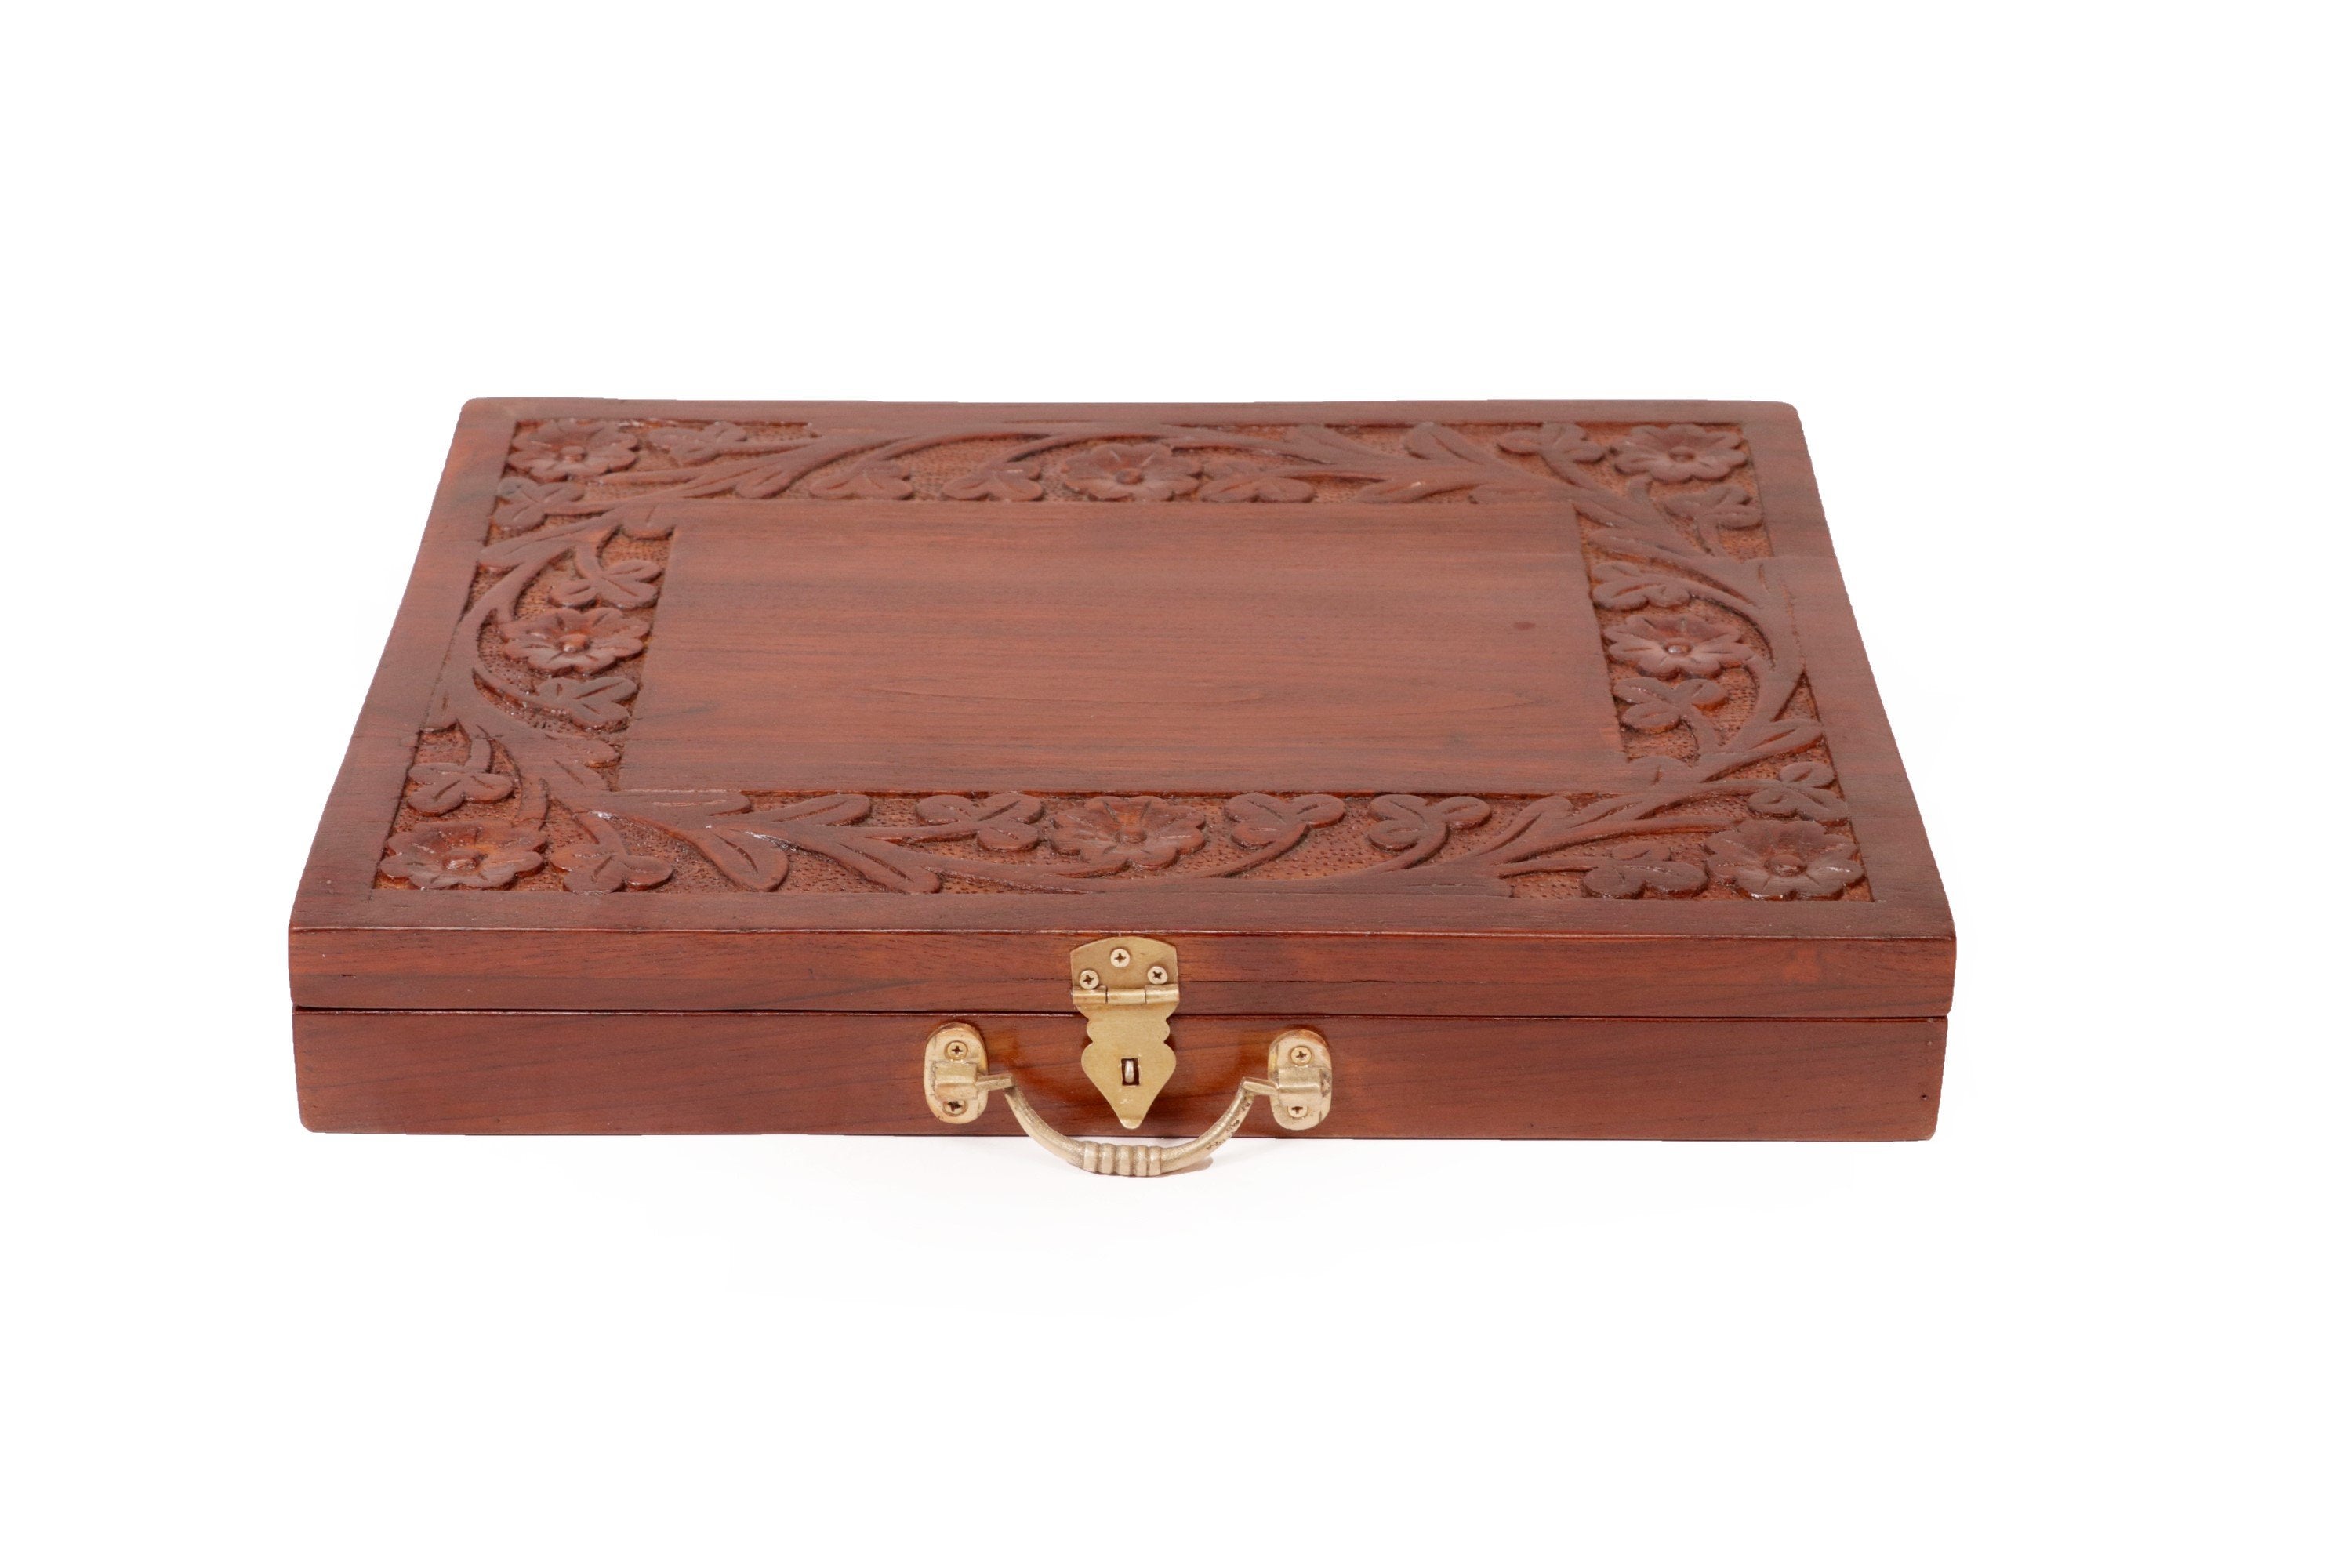 Wooden Carved Flower Petal Box Small (17 x 14 x 2.5 Inch) Wooden Box